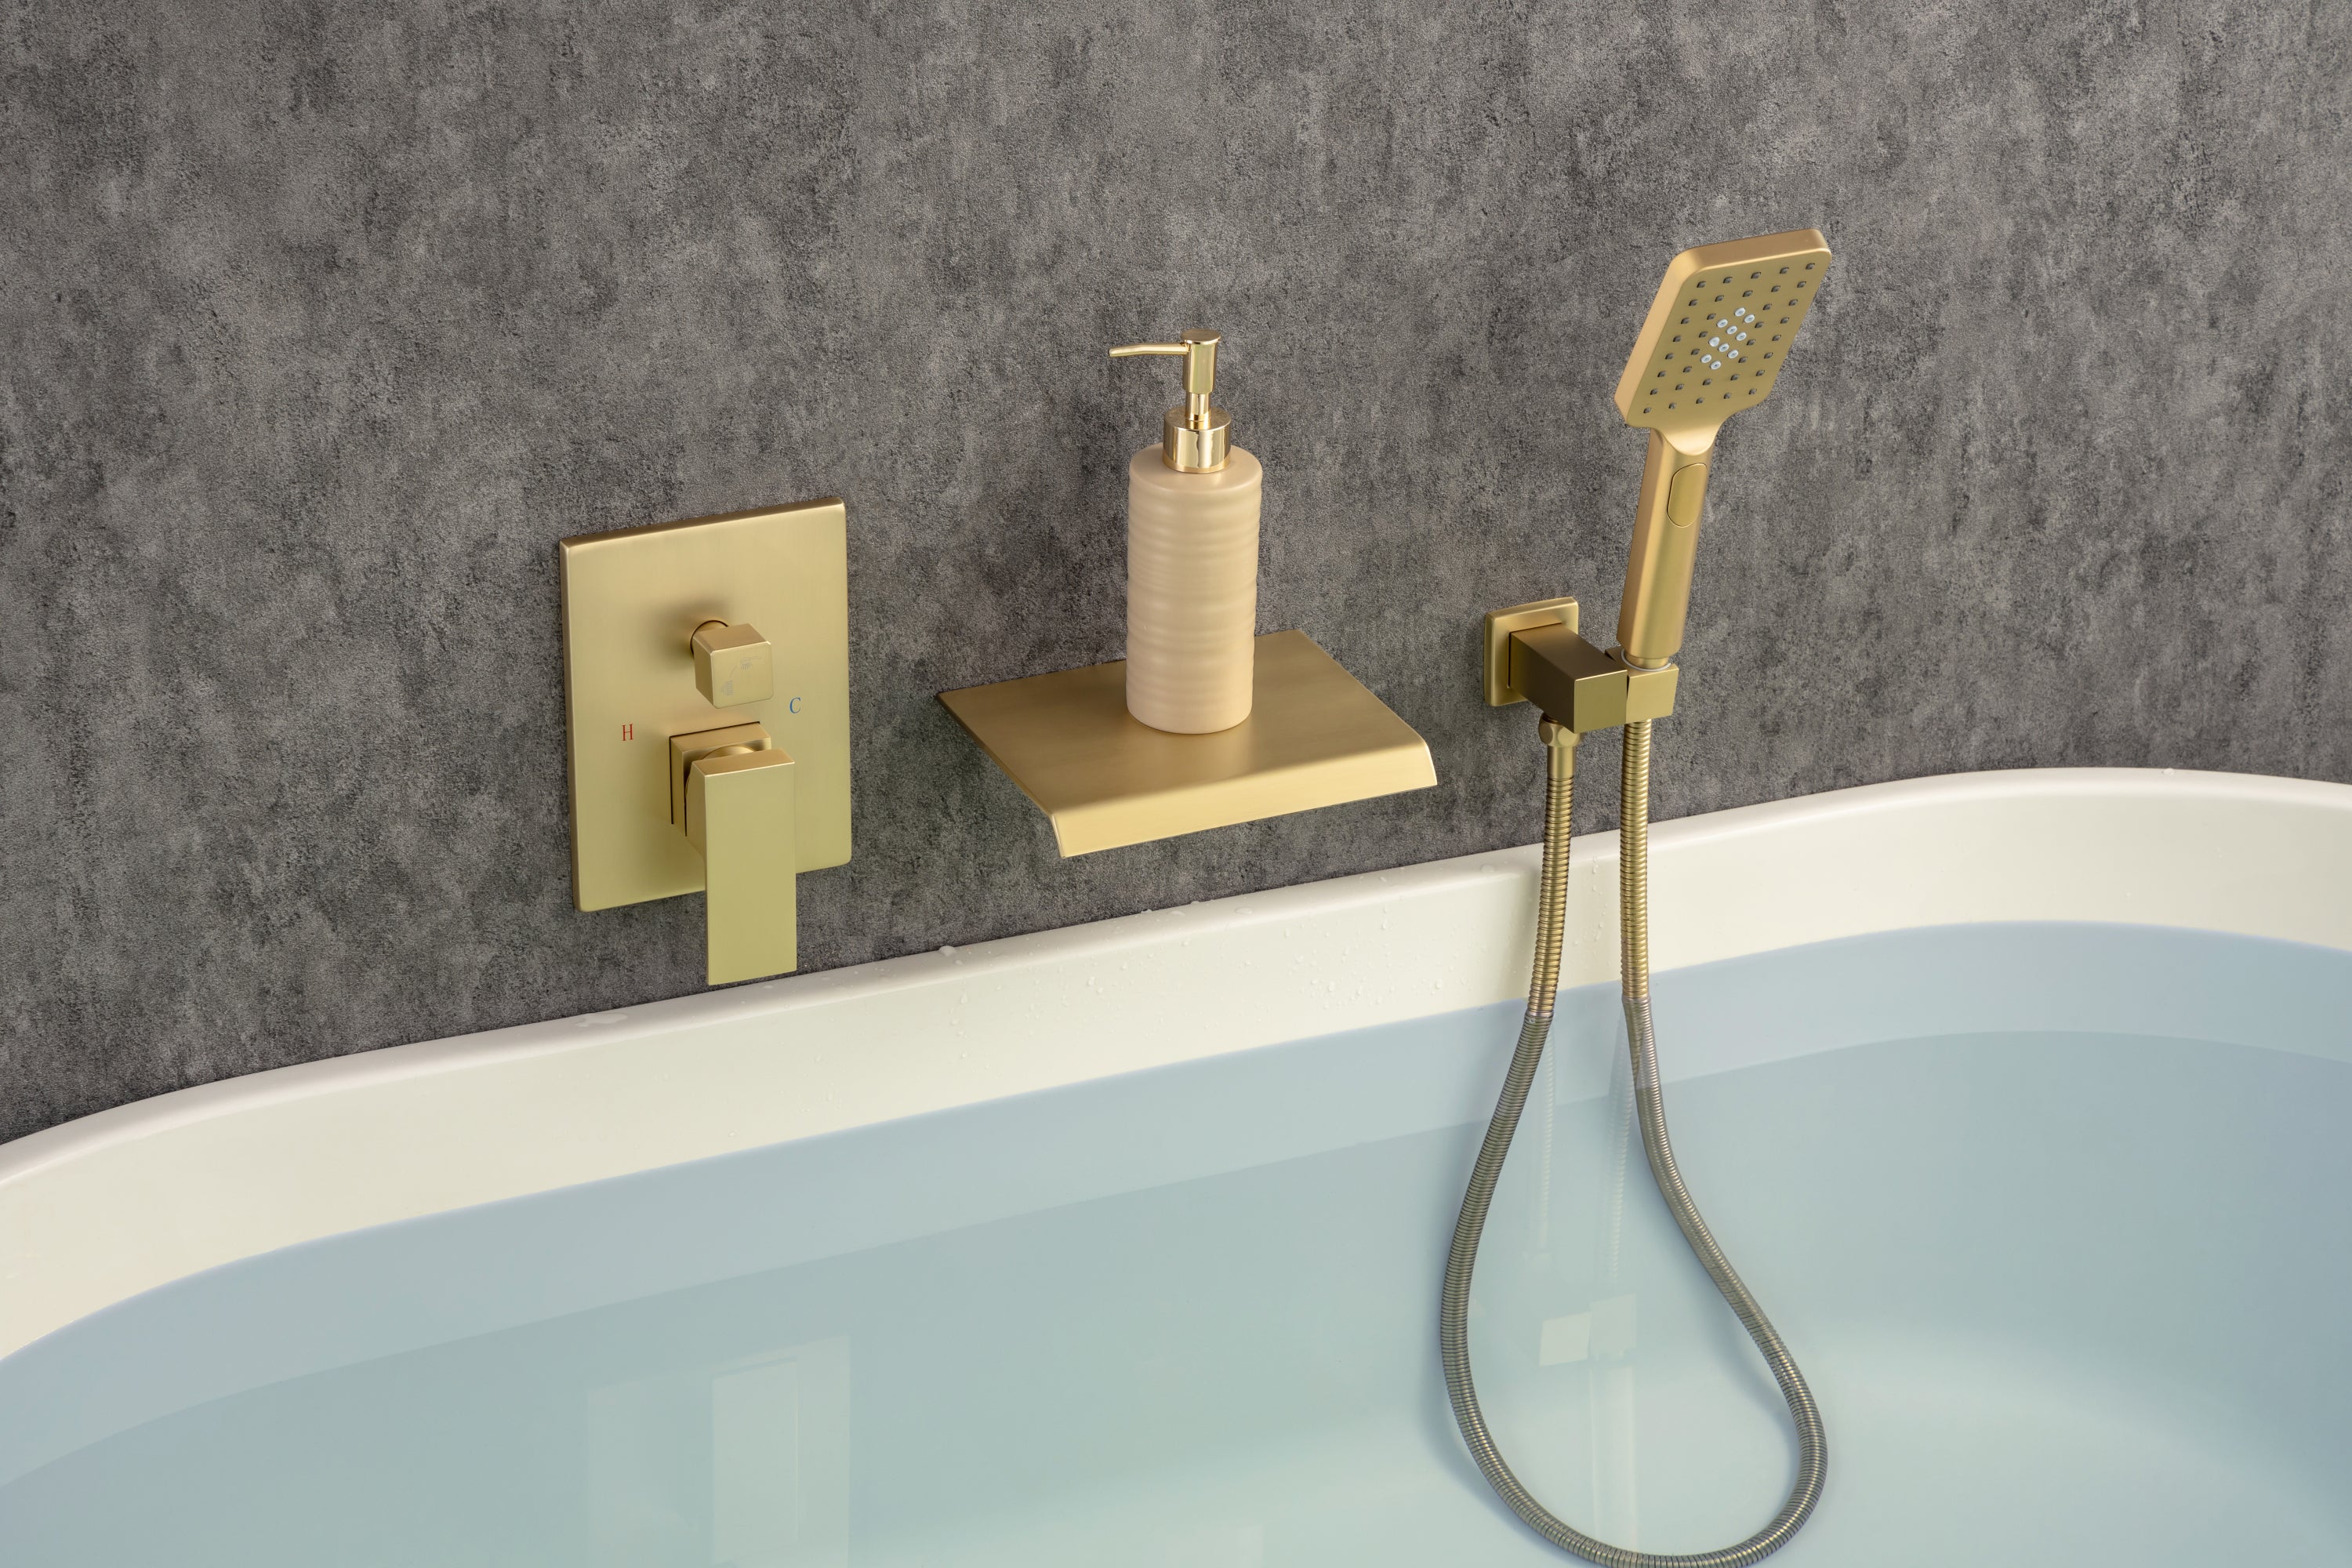 Waterfall Tub Faucet Wall Mount Roman Tub Filler Chrome Single Handle Brass Bathroom Bathtub Faucet with Hand Shower - Gold